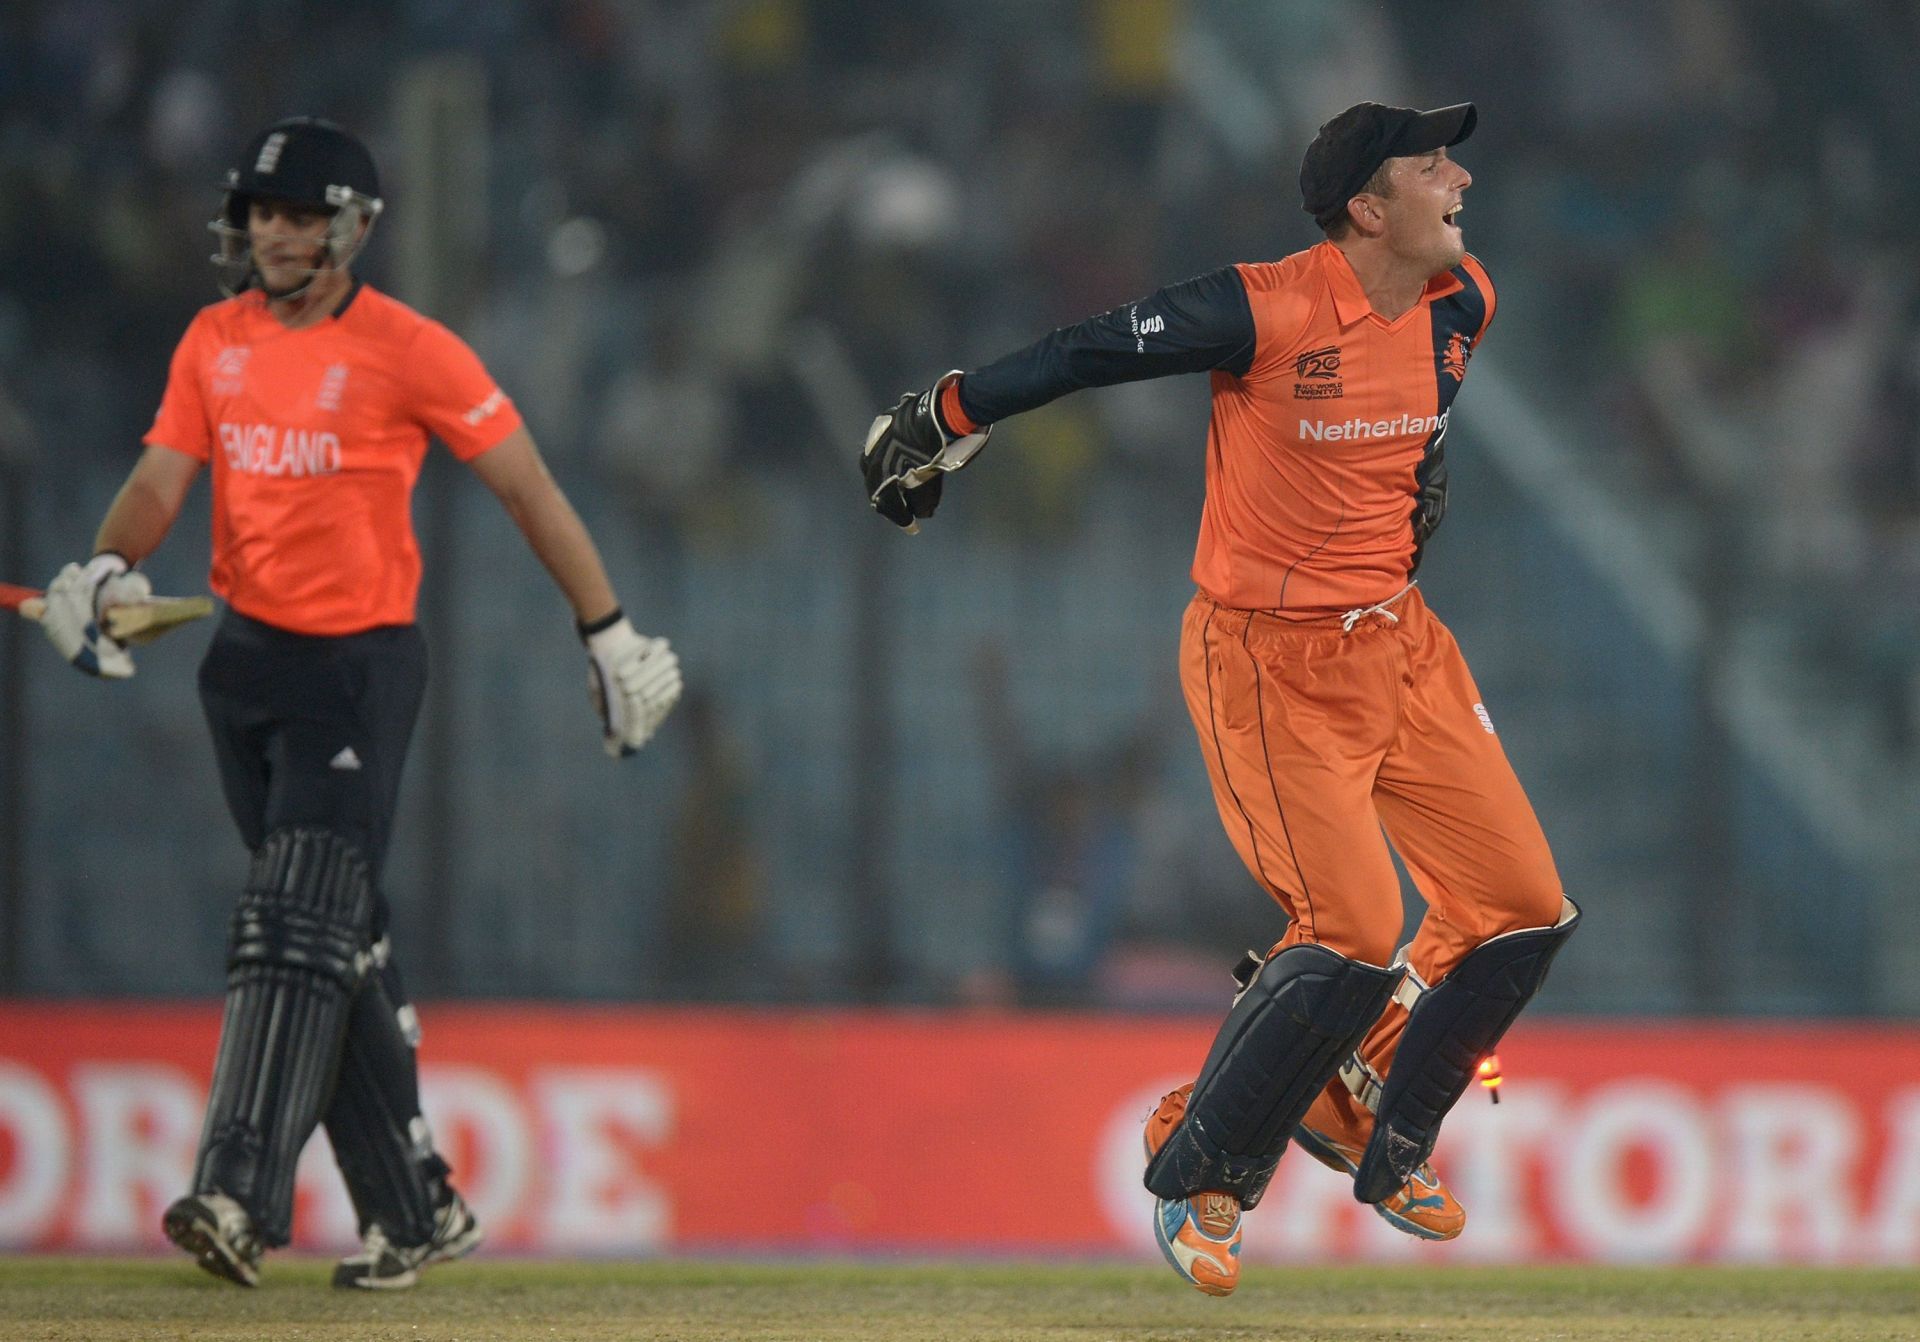 Netherlands beat England again in the 2014 T20 World Cup (Image: Getty)